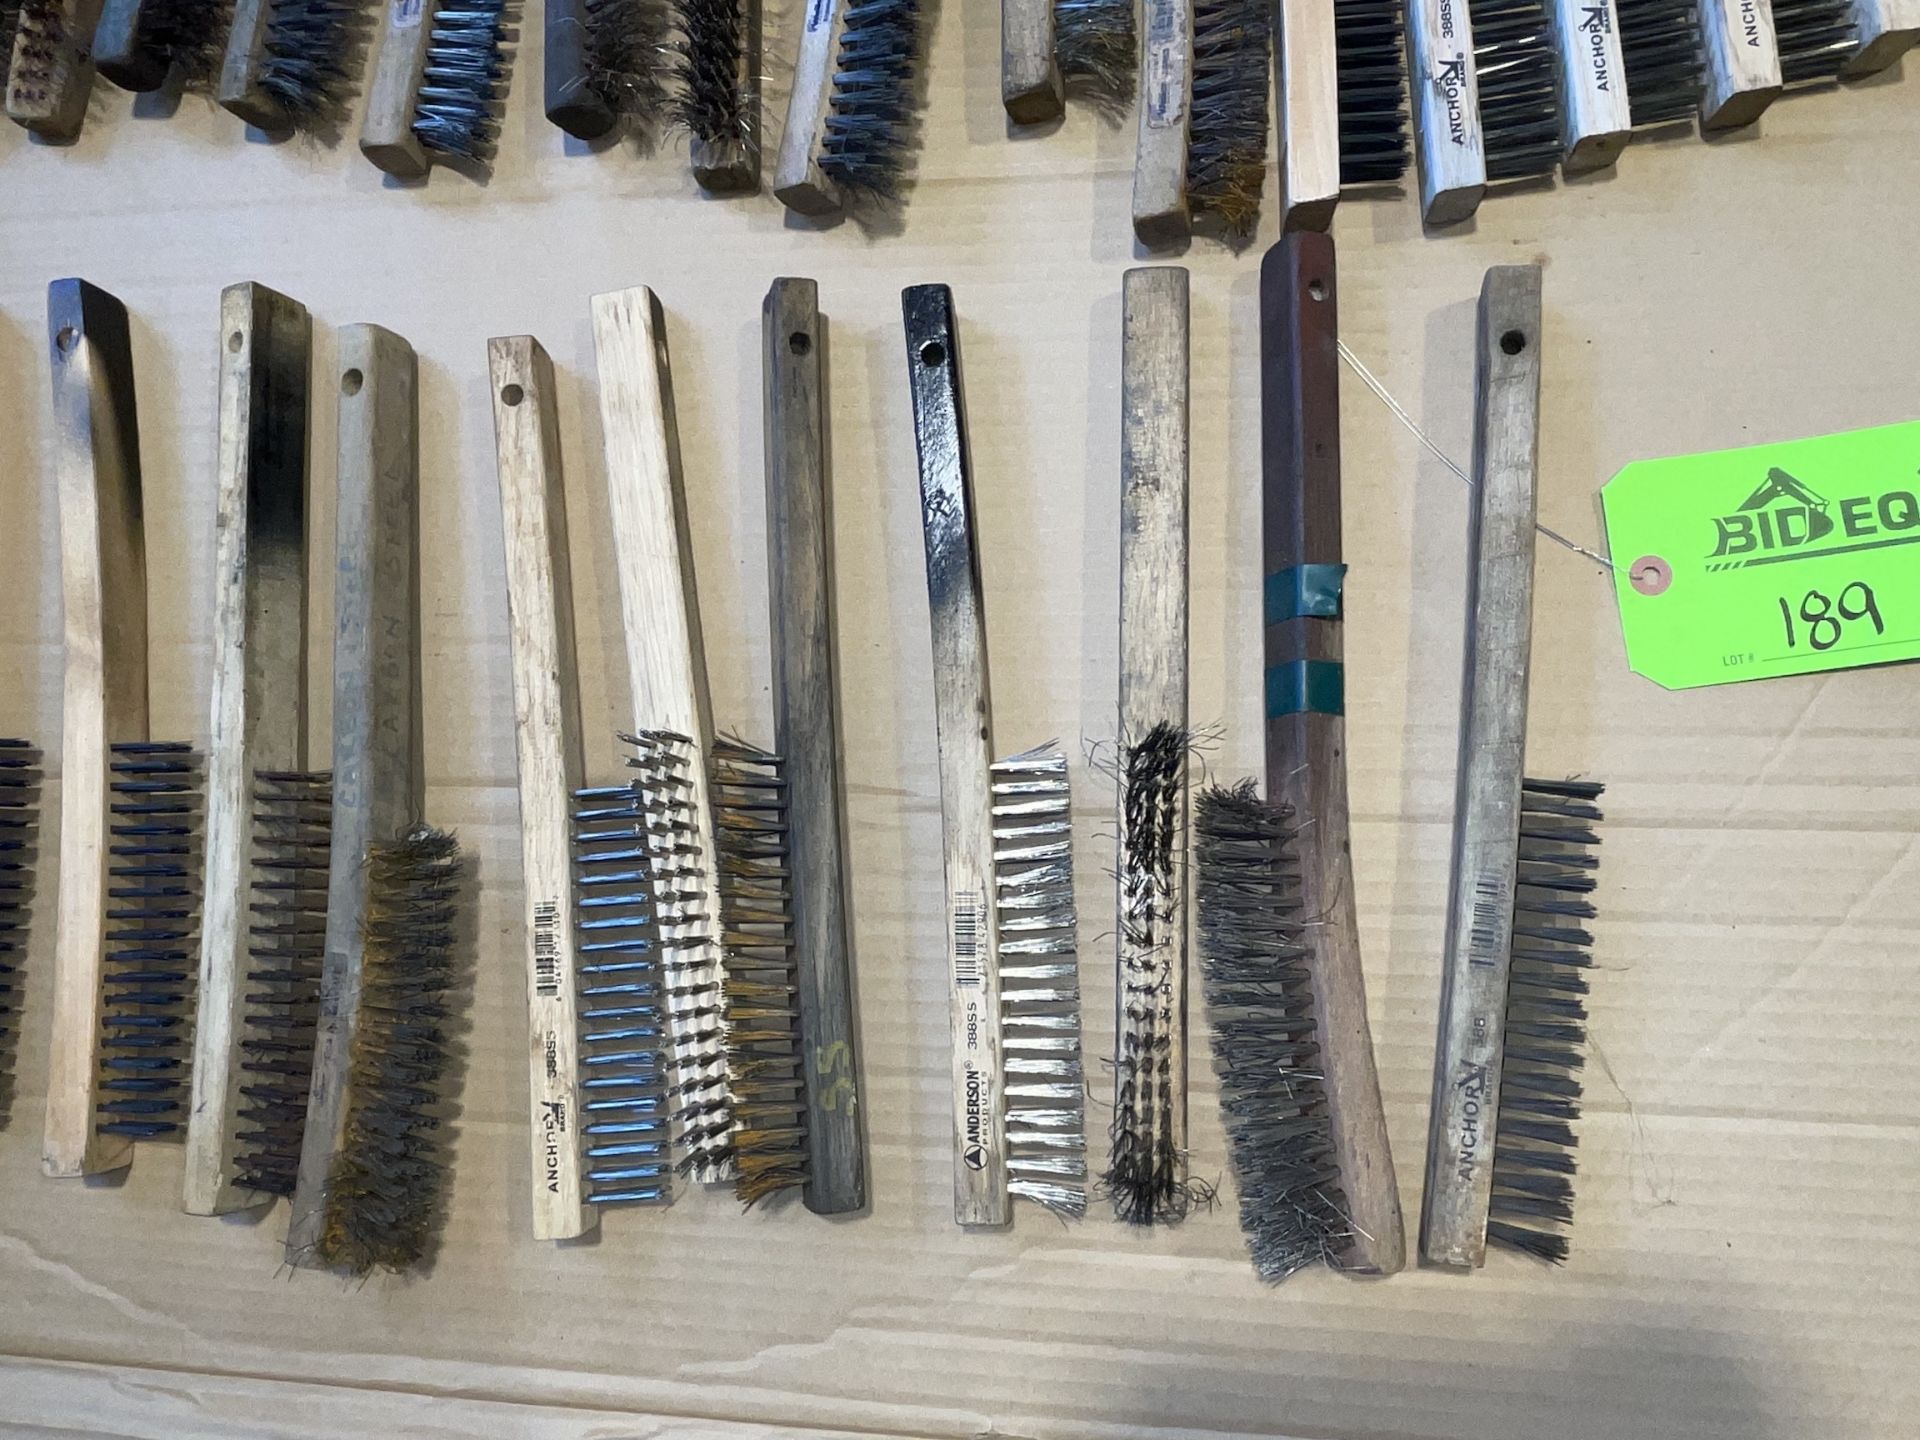 Lot of Stainless Steel Wire Brushes - Upland - Image 2 of 8